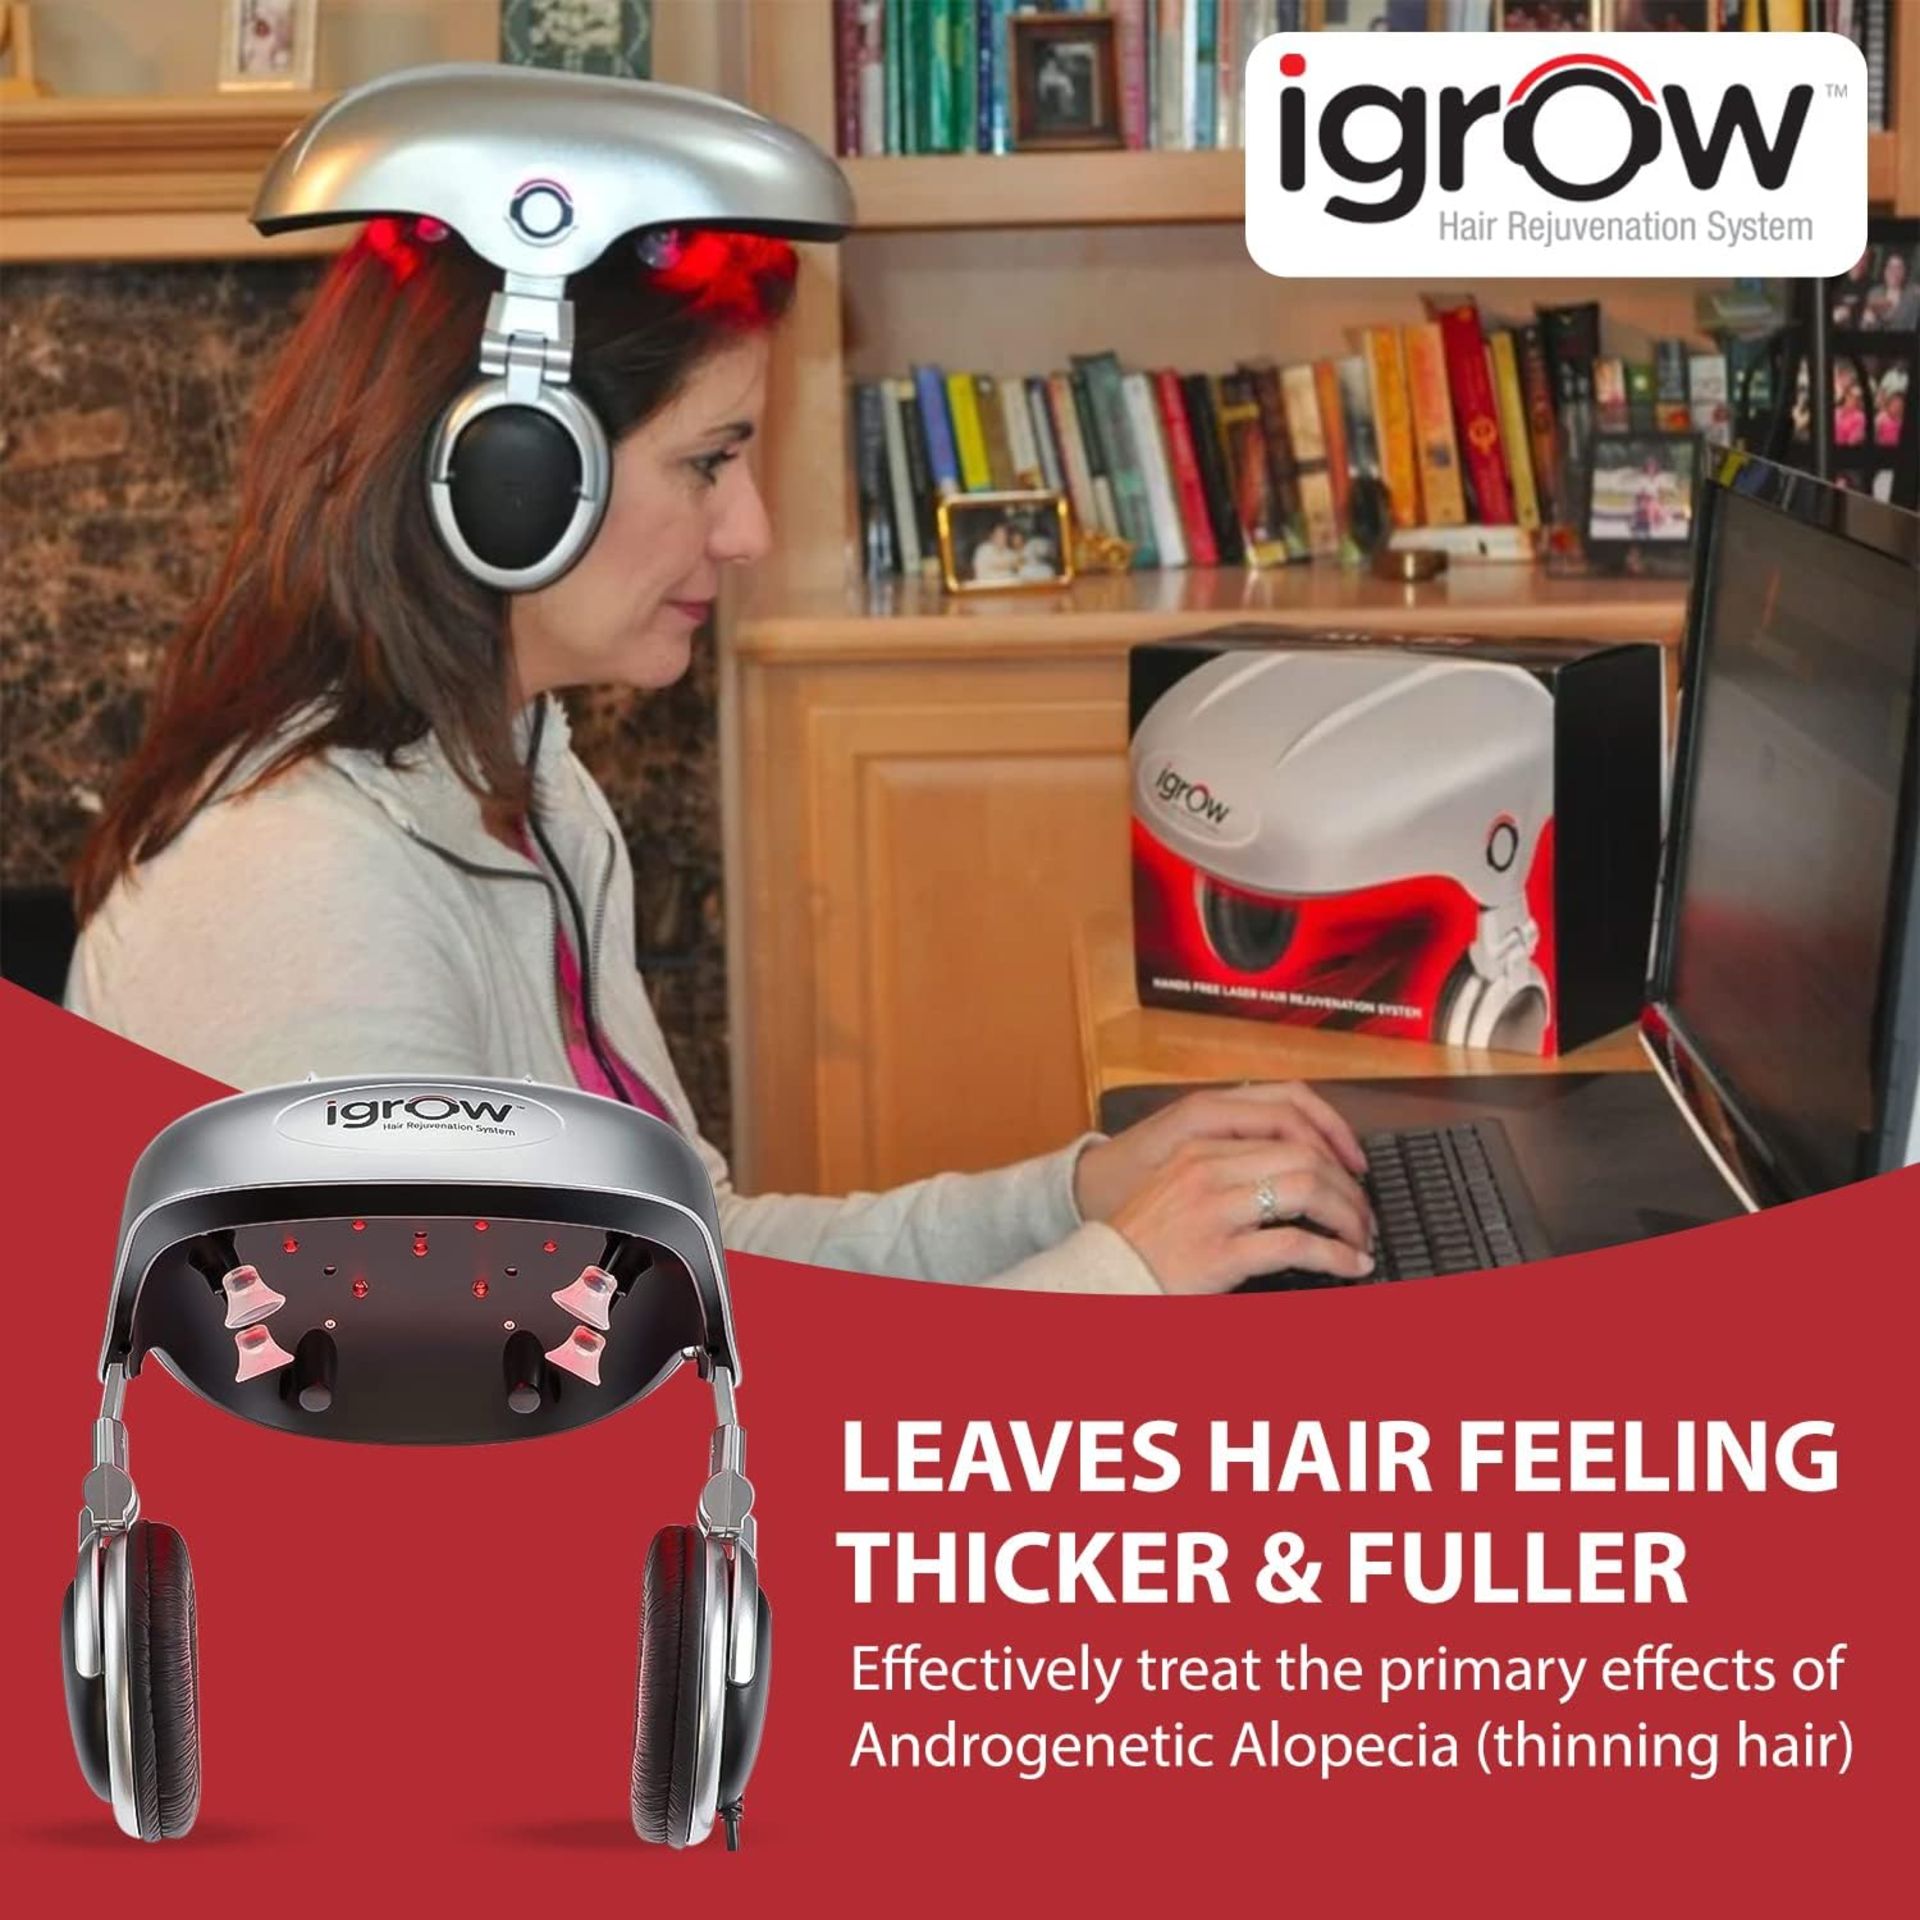 Brand New iGrow Professional Laser Hair Growth System - FDA Cleared Laser Cap Hair Growth for - Image 4 of 5